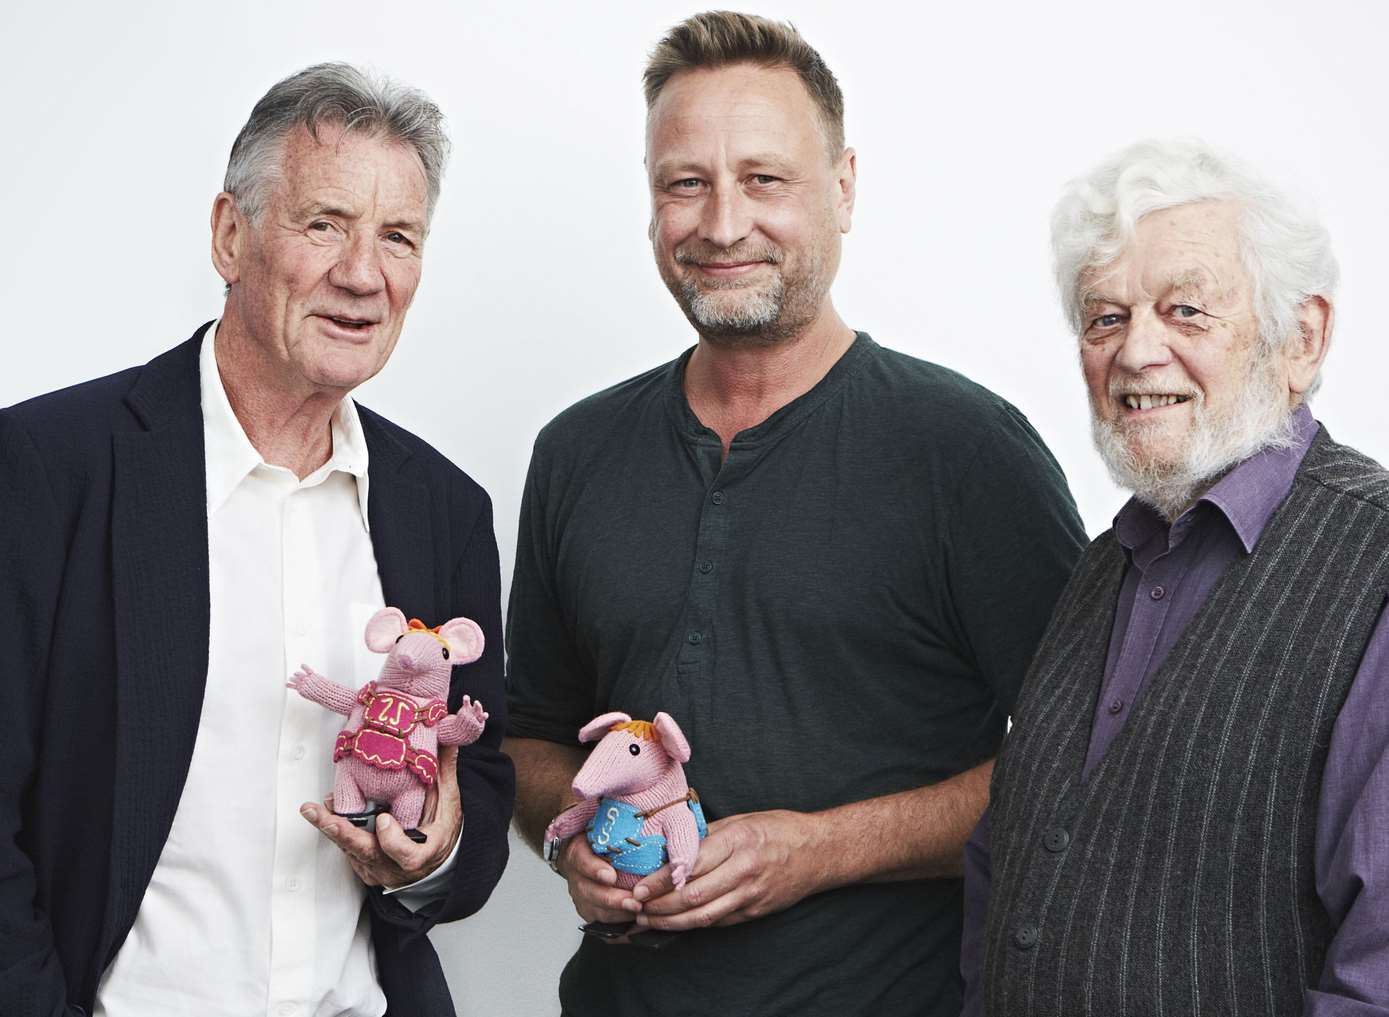 Michael Palin, who narrates the new version of The Clangers, with Dan Postgate and original creator Peter Firmin